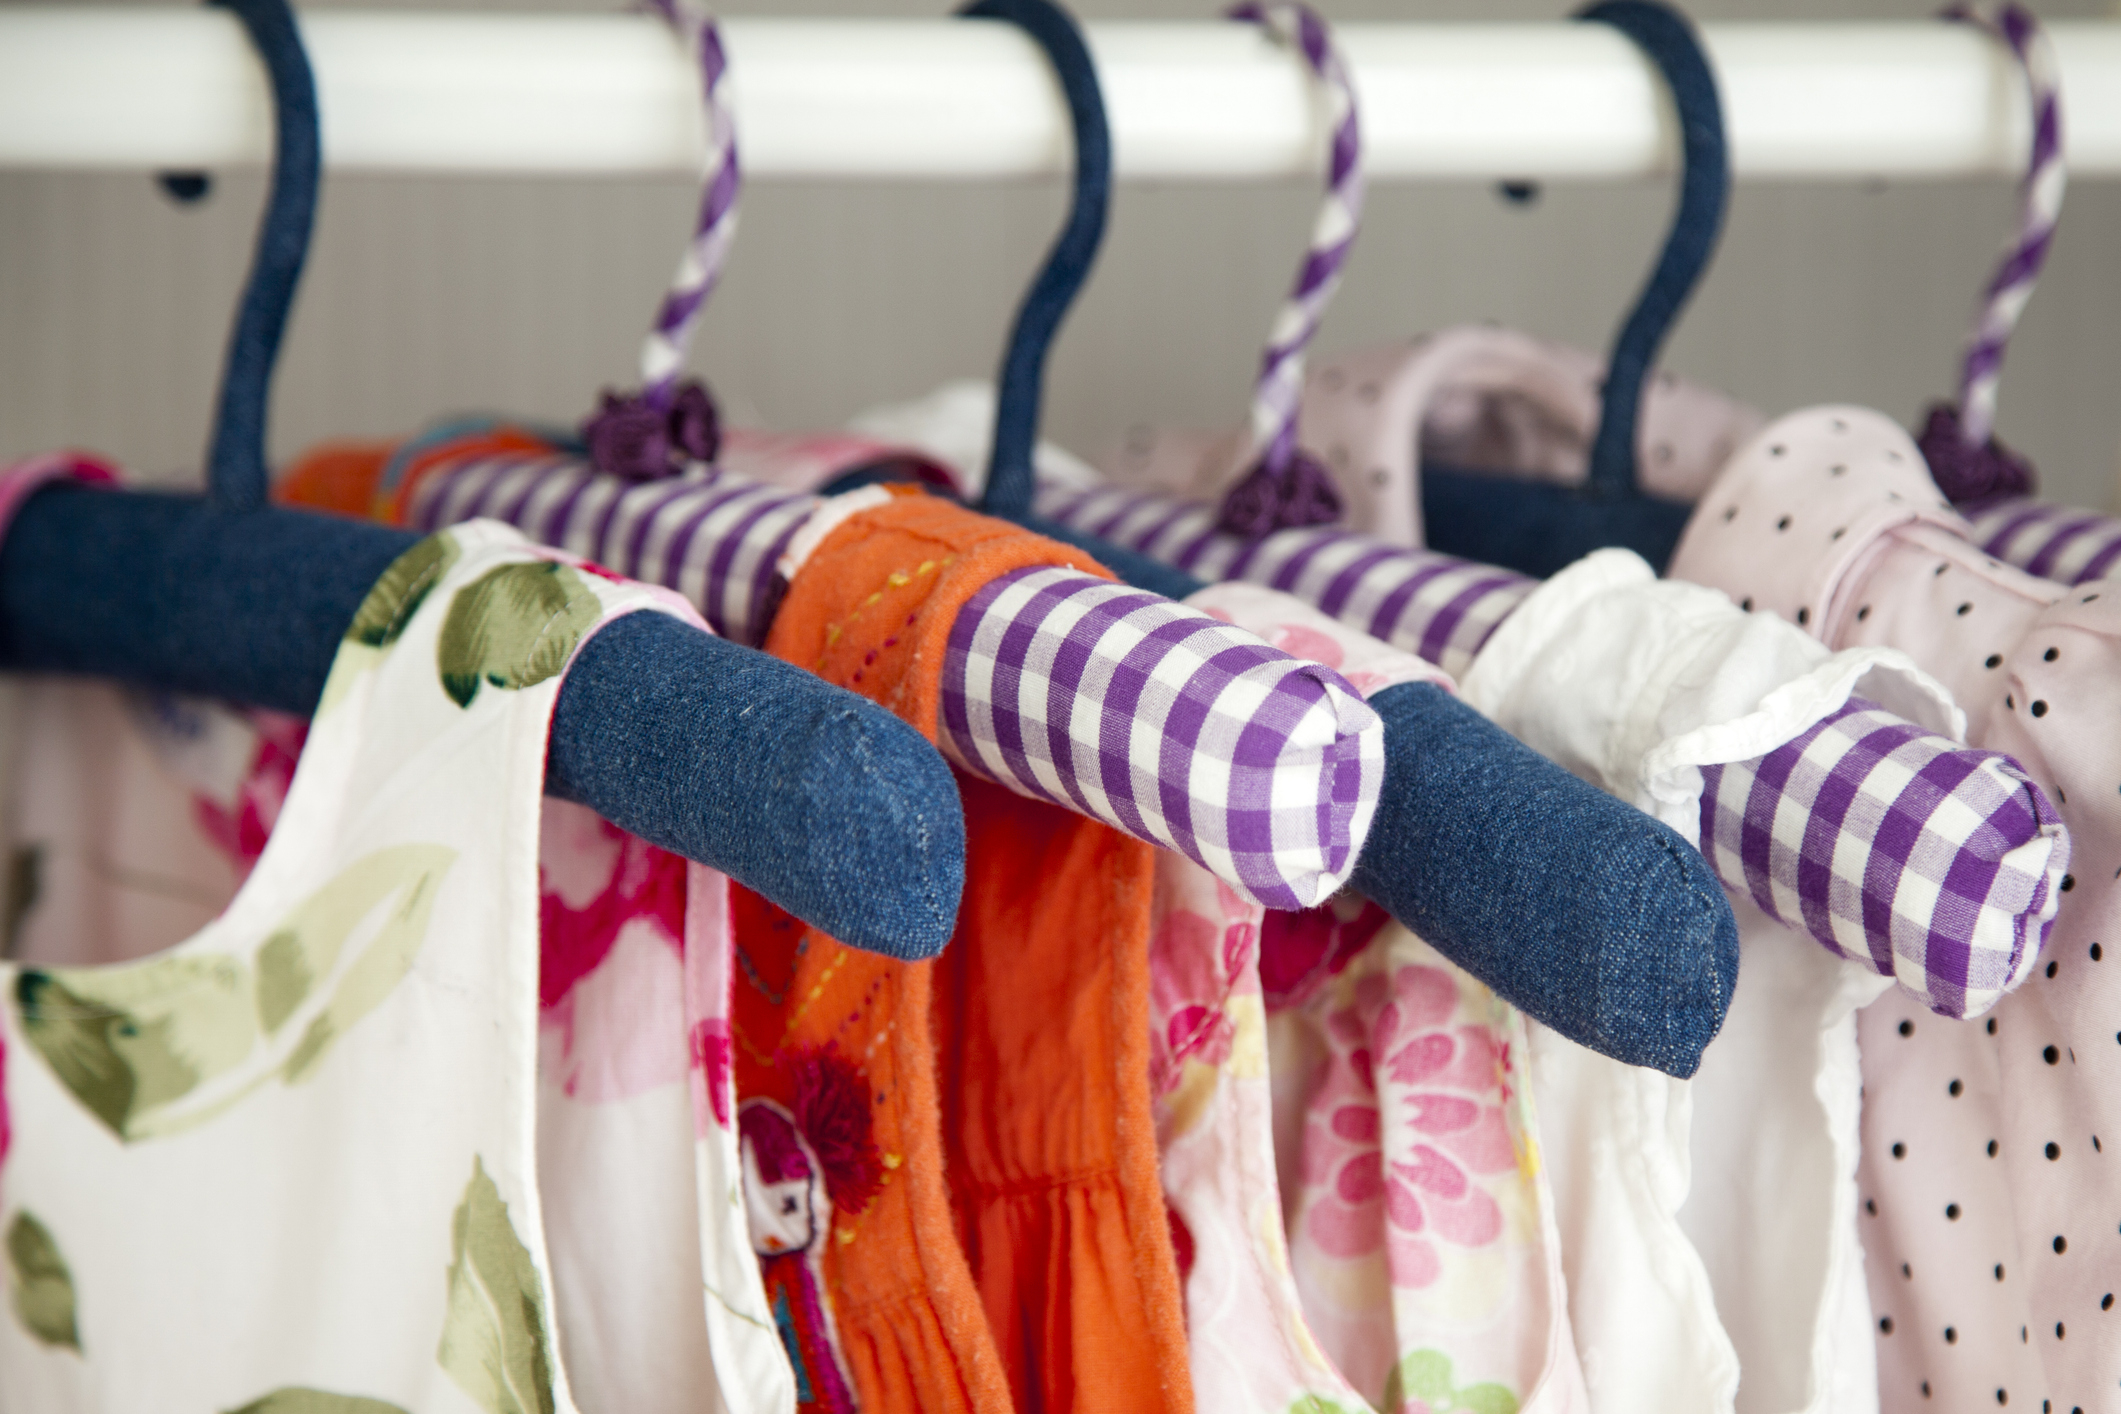 Children&#x27;s clothes on hangers, with various patterns and a blue sock hanging on one